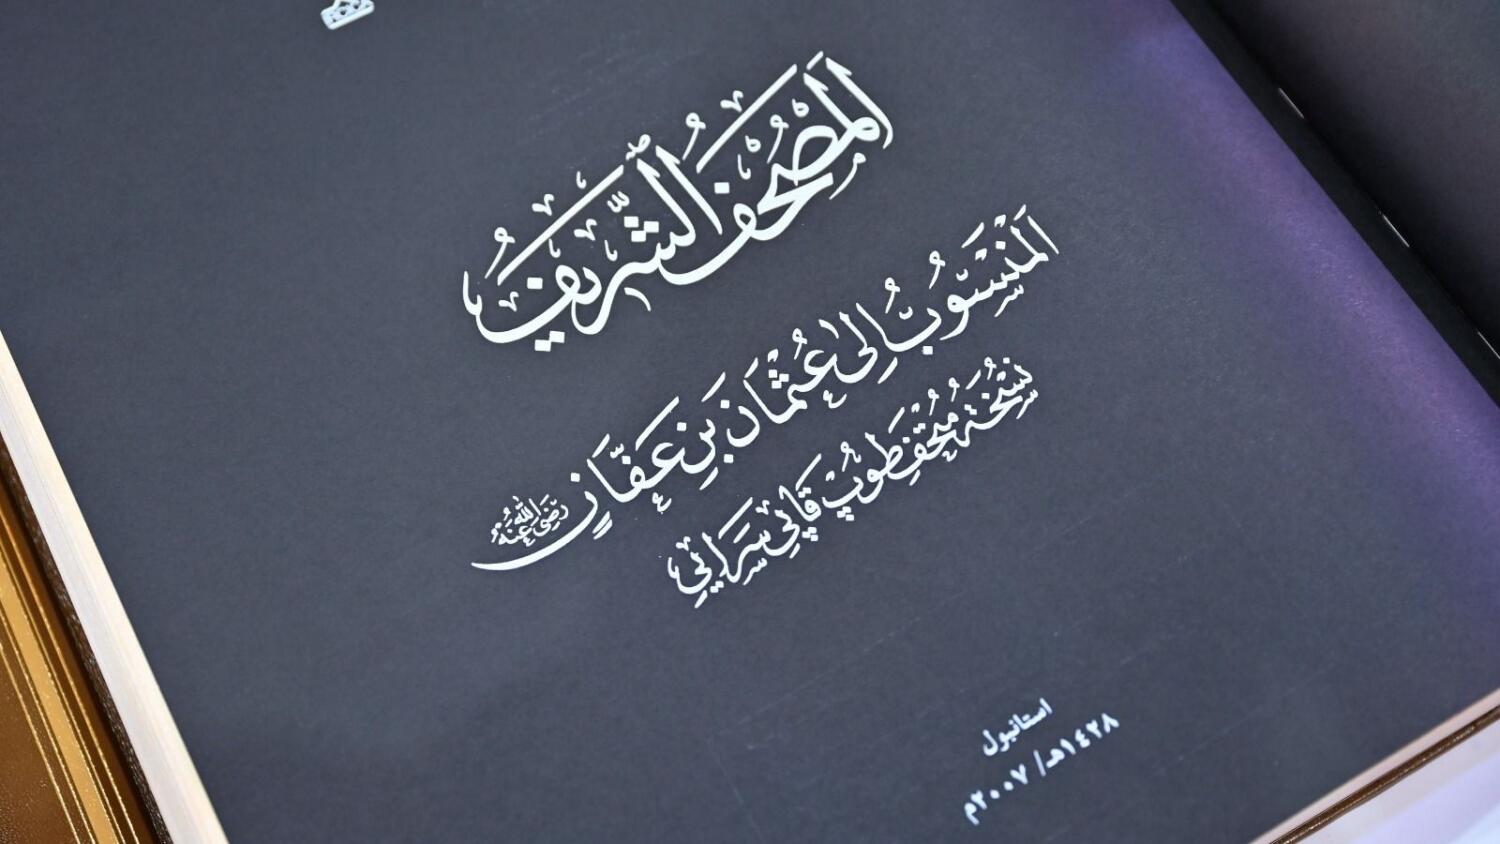 Copies of ancient Quran on sale for Dh13,000 at Sharjah book fair